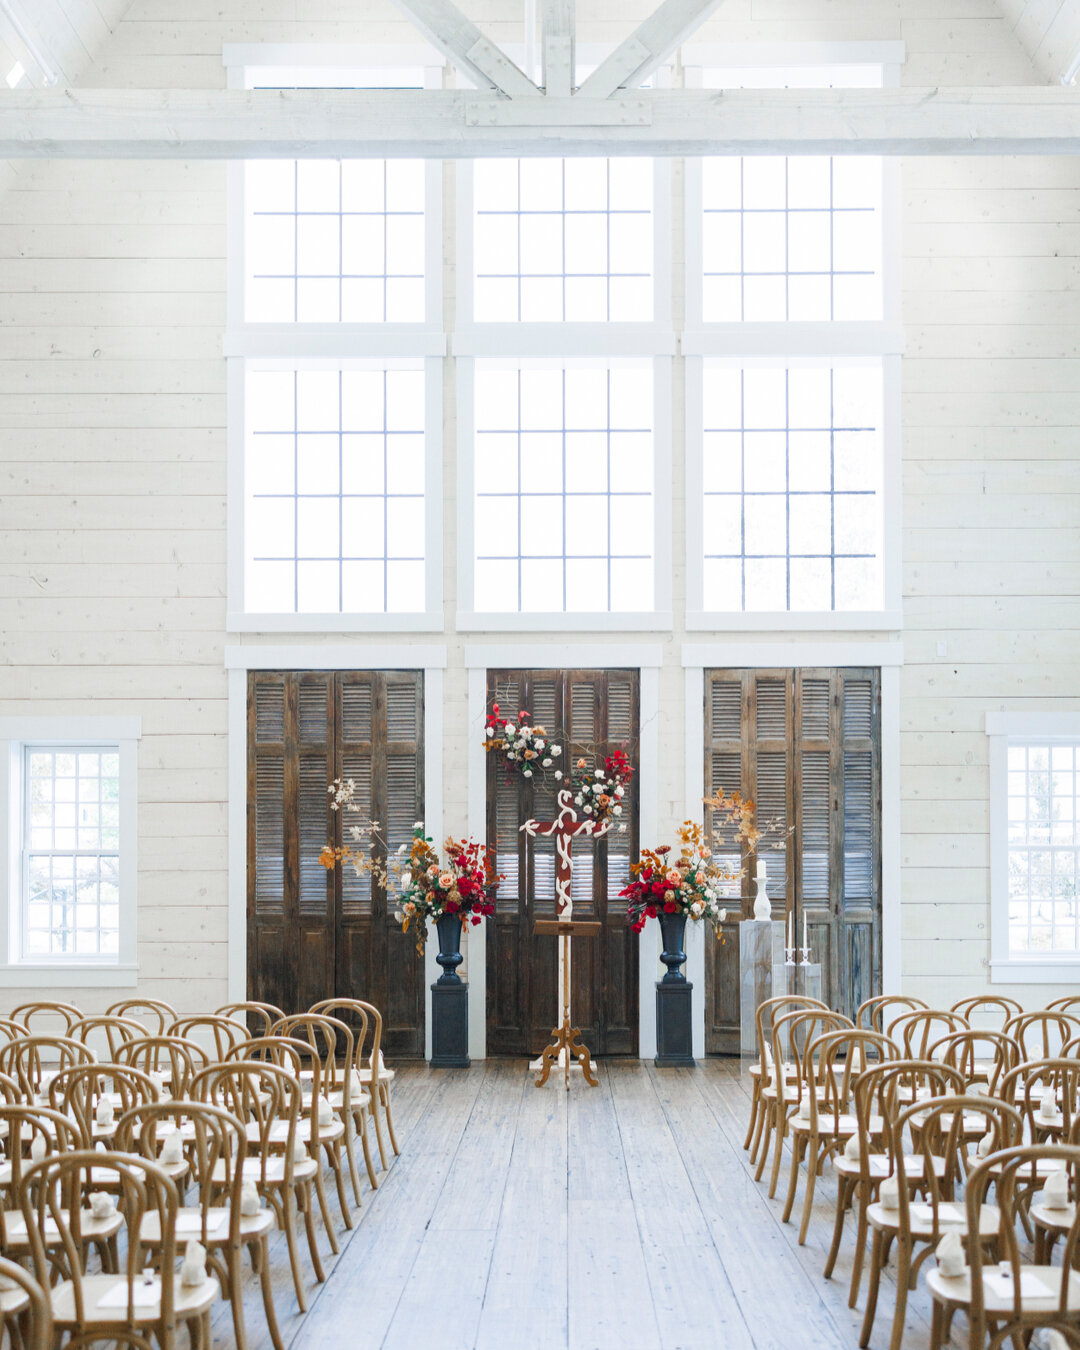 Can you spy the handmade cross from Nikki and Jason's wedding at @walkerfarms? Their ceremony was full of so many sweet moments, including singing praises, sharing communion, exchanging vows, and sharing their *first kiss ever*. It was such a special